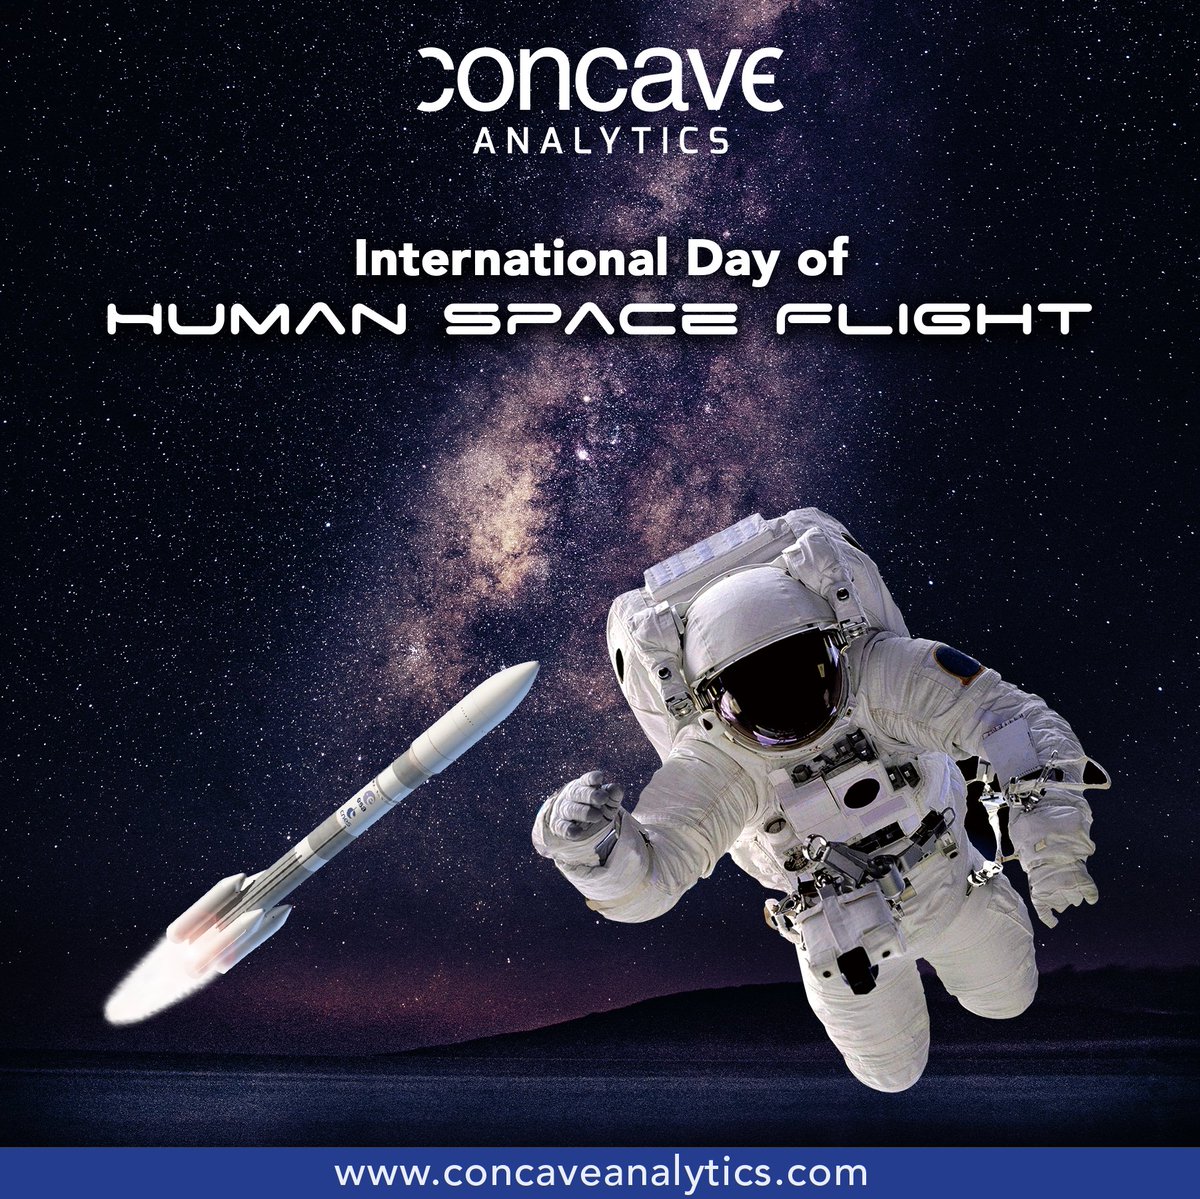 Today, we celebrate the incredible achievements of human space flight and the pioneers who dared to explore the cosmos. Let's honor their courage, passion, and unwavering spirit of discovery. 
#ConcaveAnalytics #HumanSpaceFlightDay